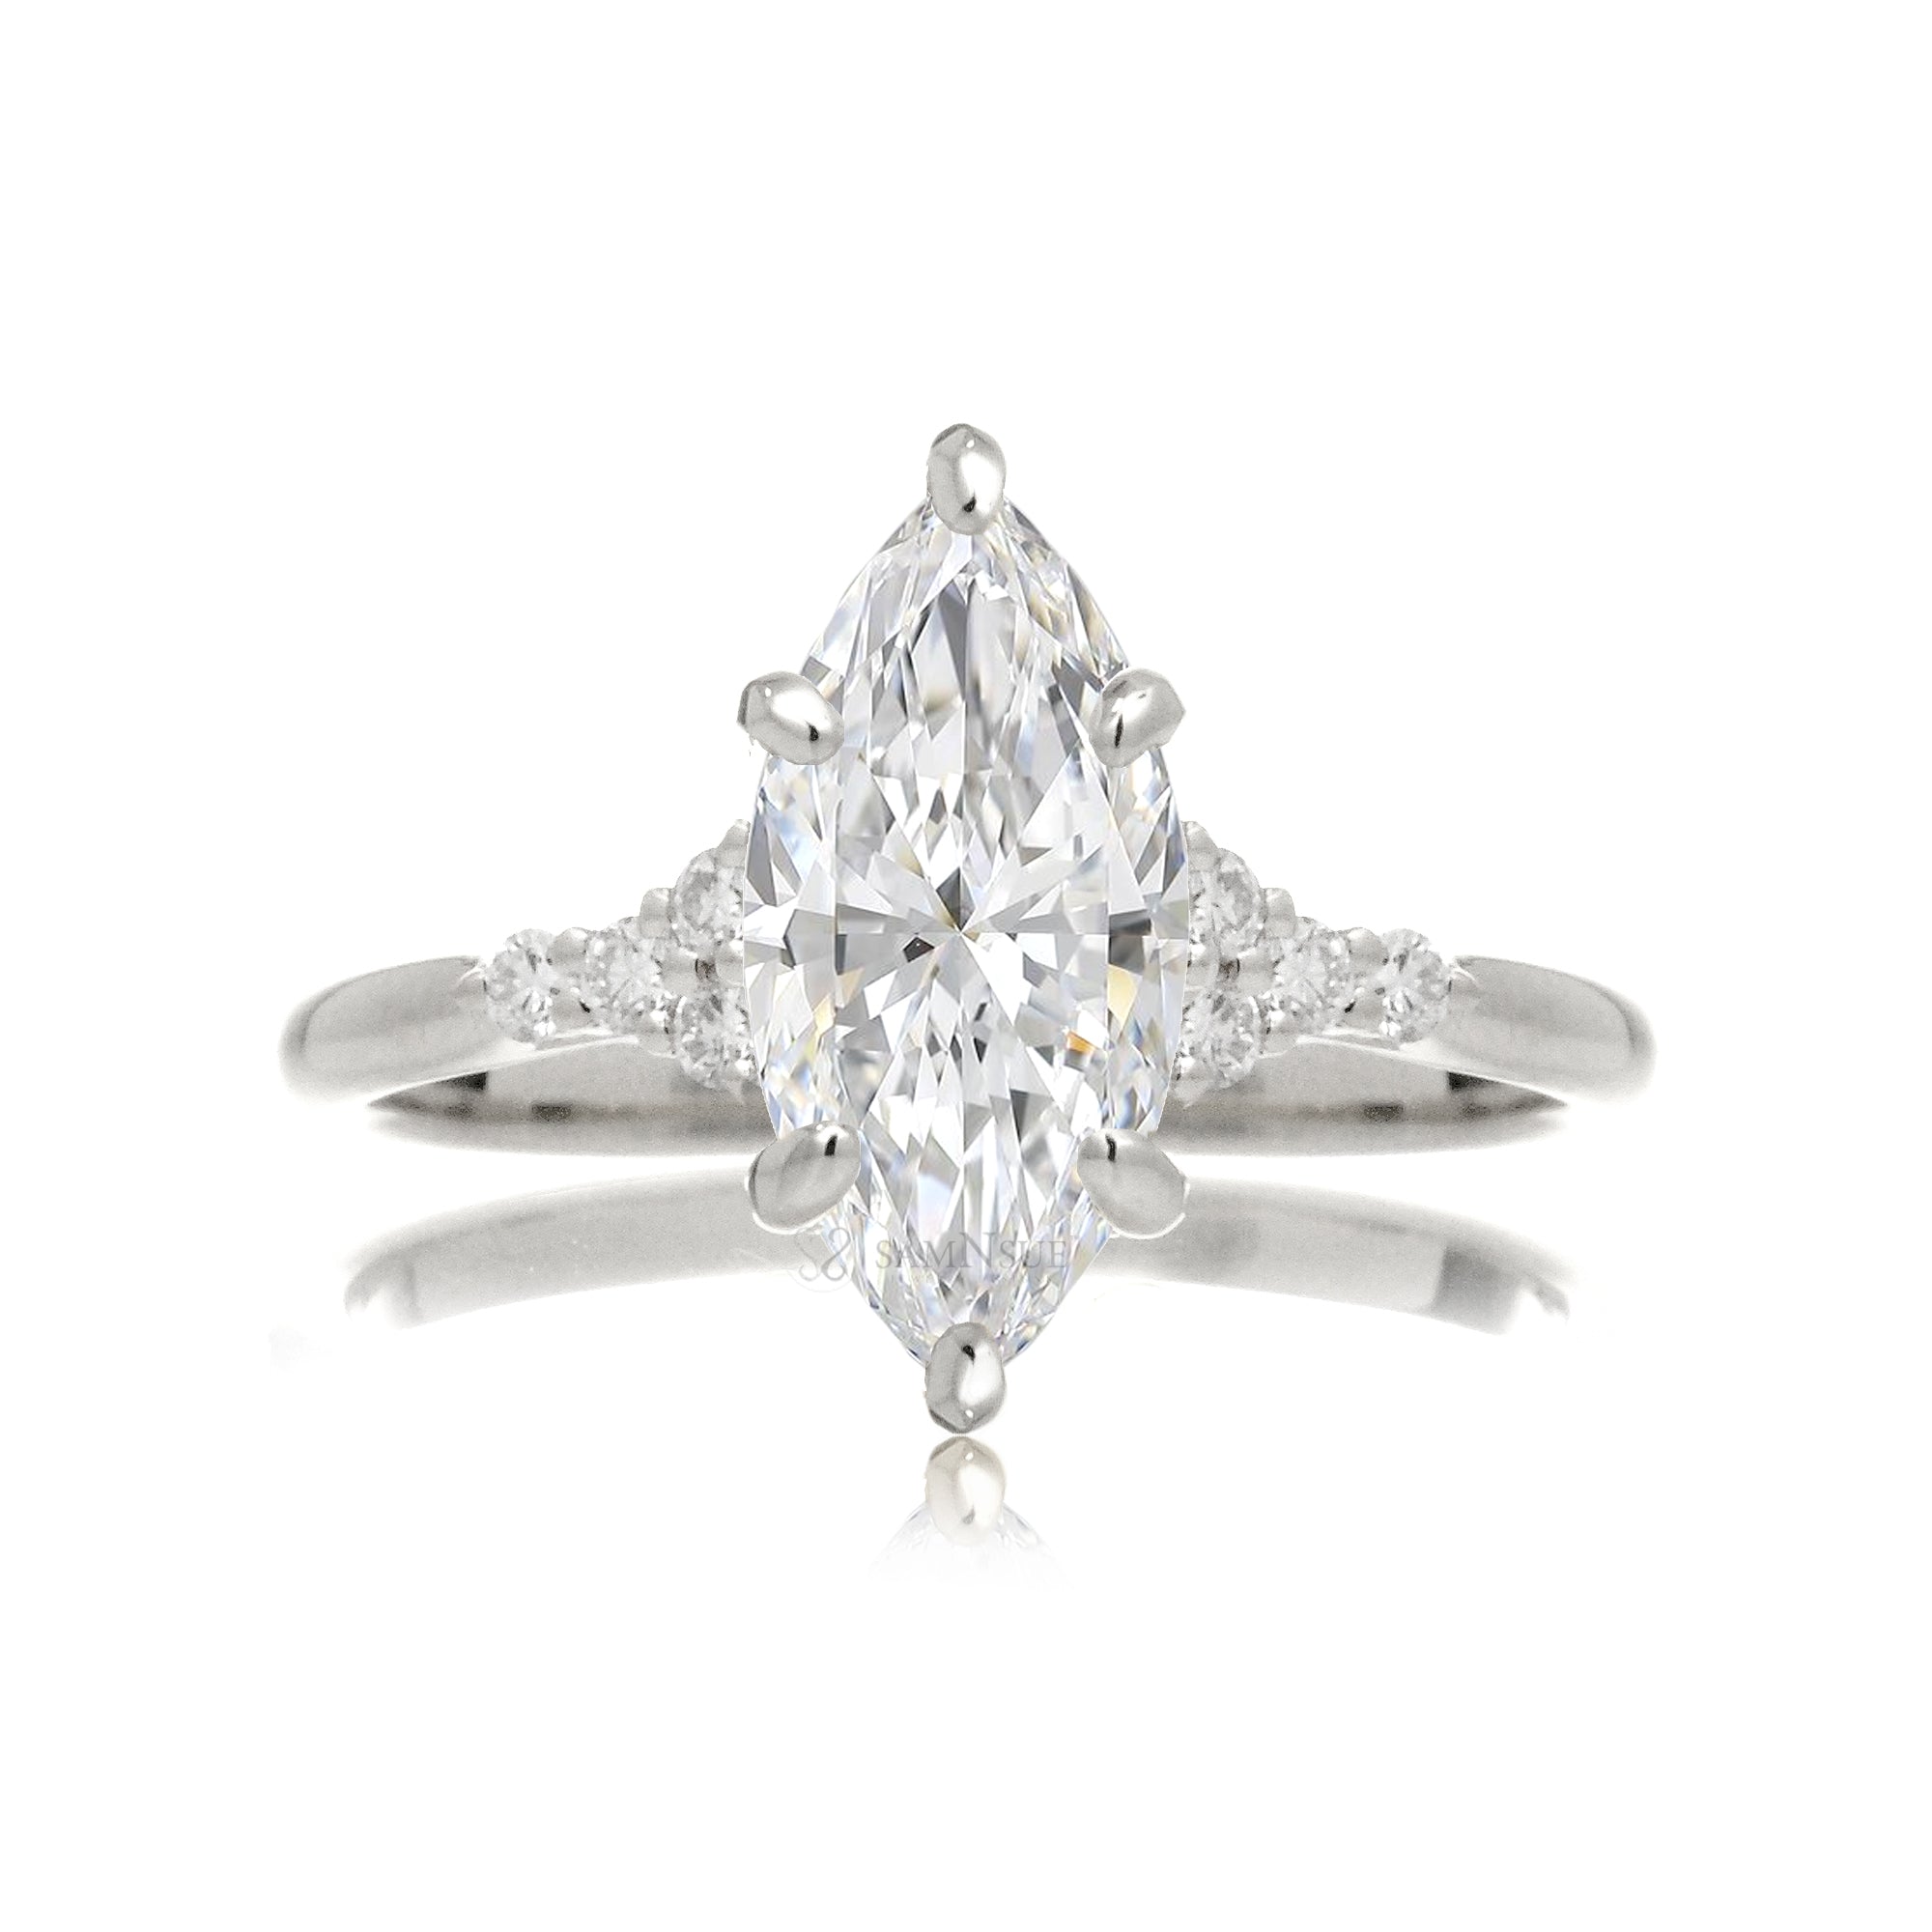 Marquise engagement ring with side stones and a thin comfort fit band in white gold - the Chloe